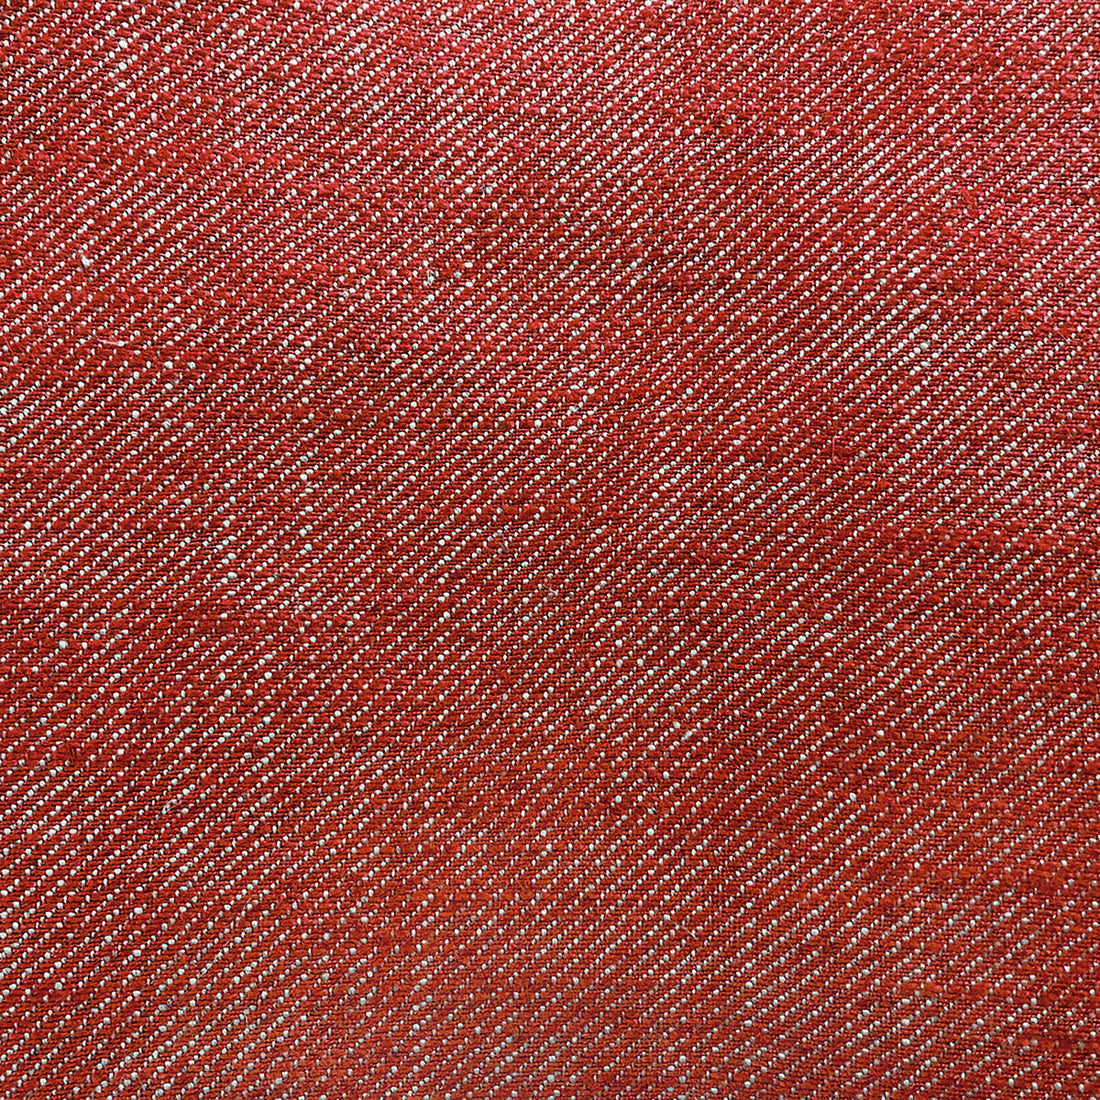 Hisa fabric in rojo color - pattern GDT5639.010.0 - by Gaston y Daniela in the Gaston Japon collection